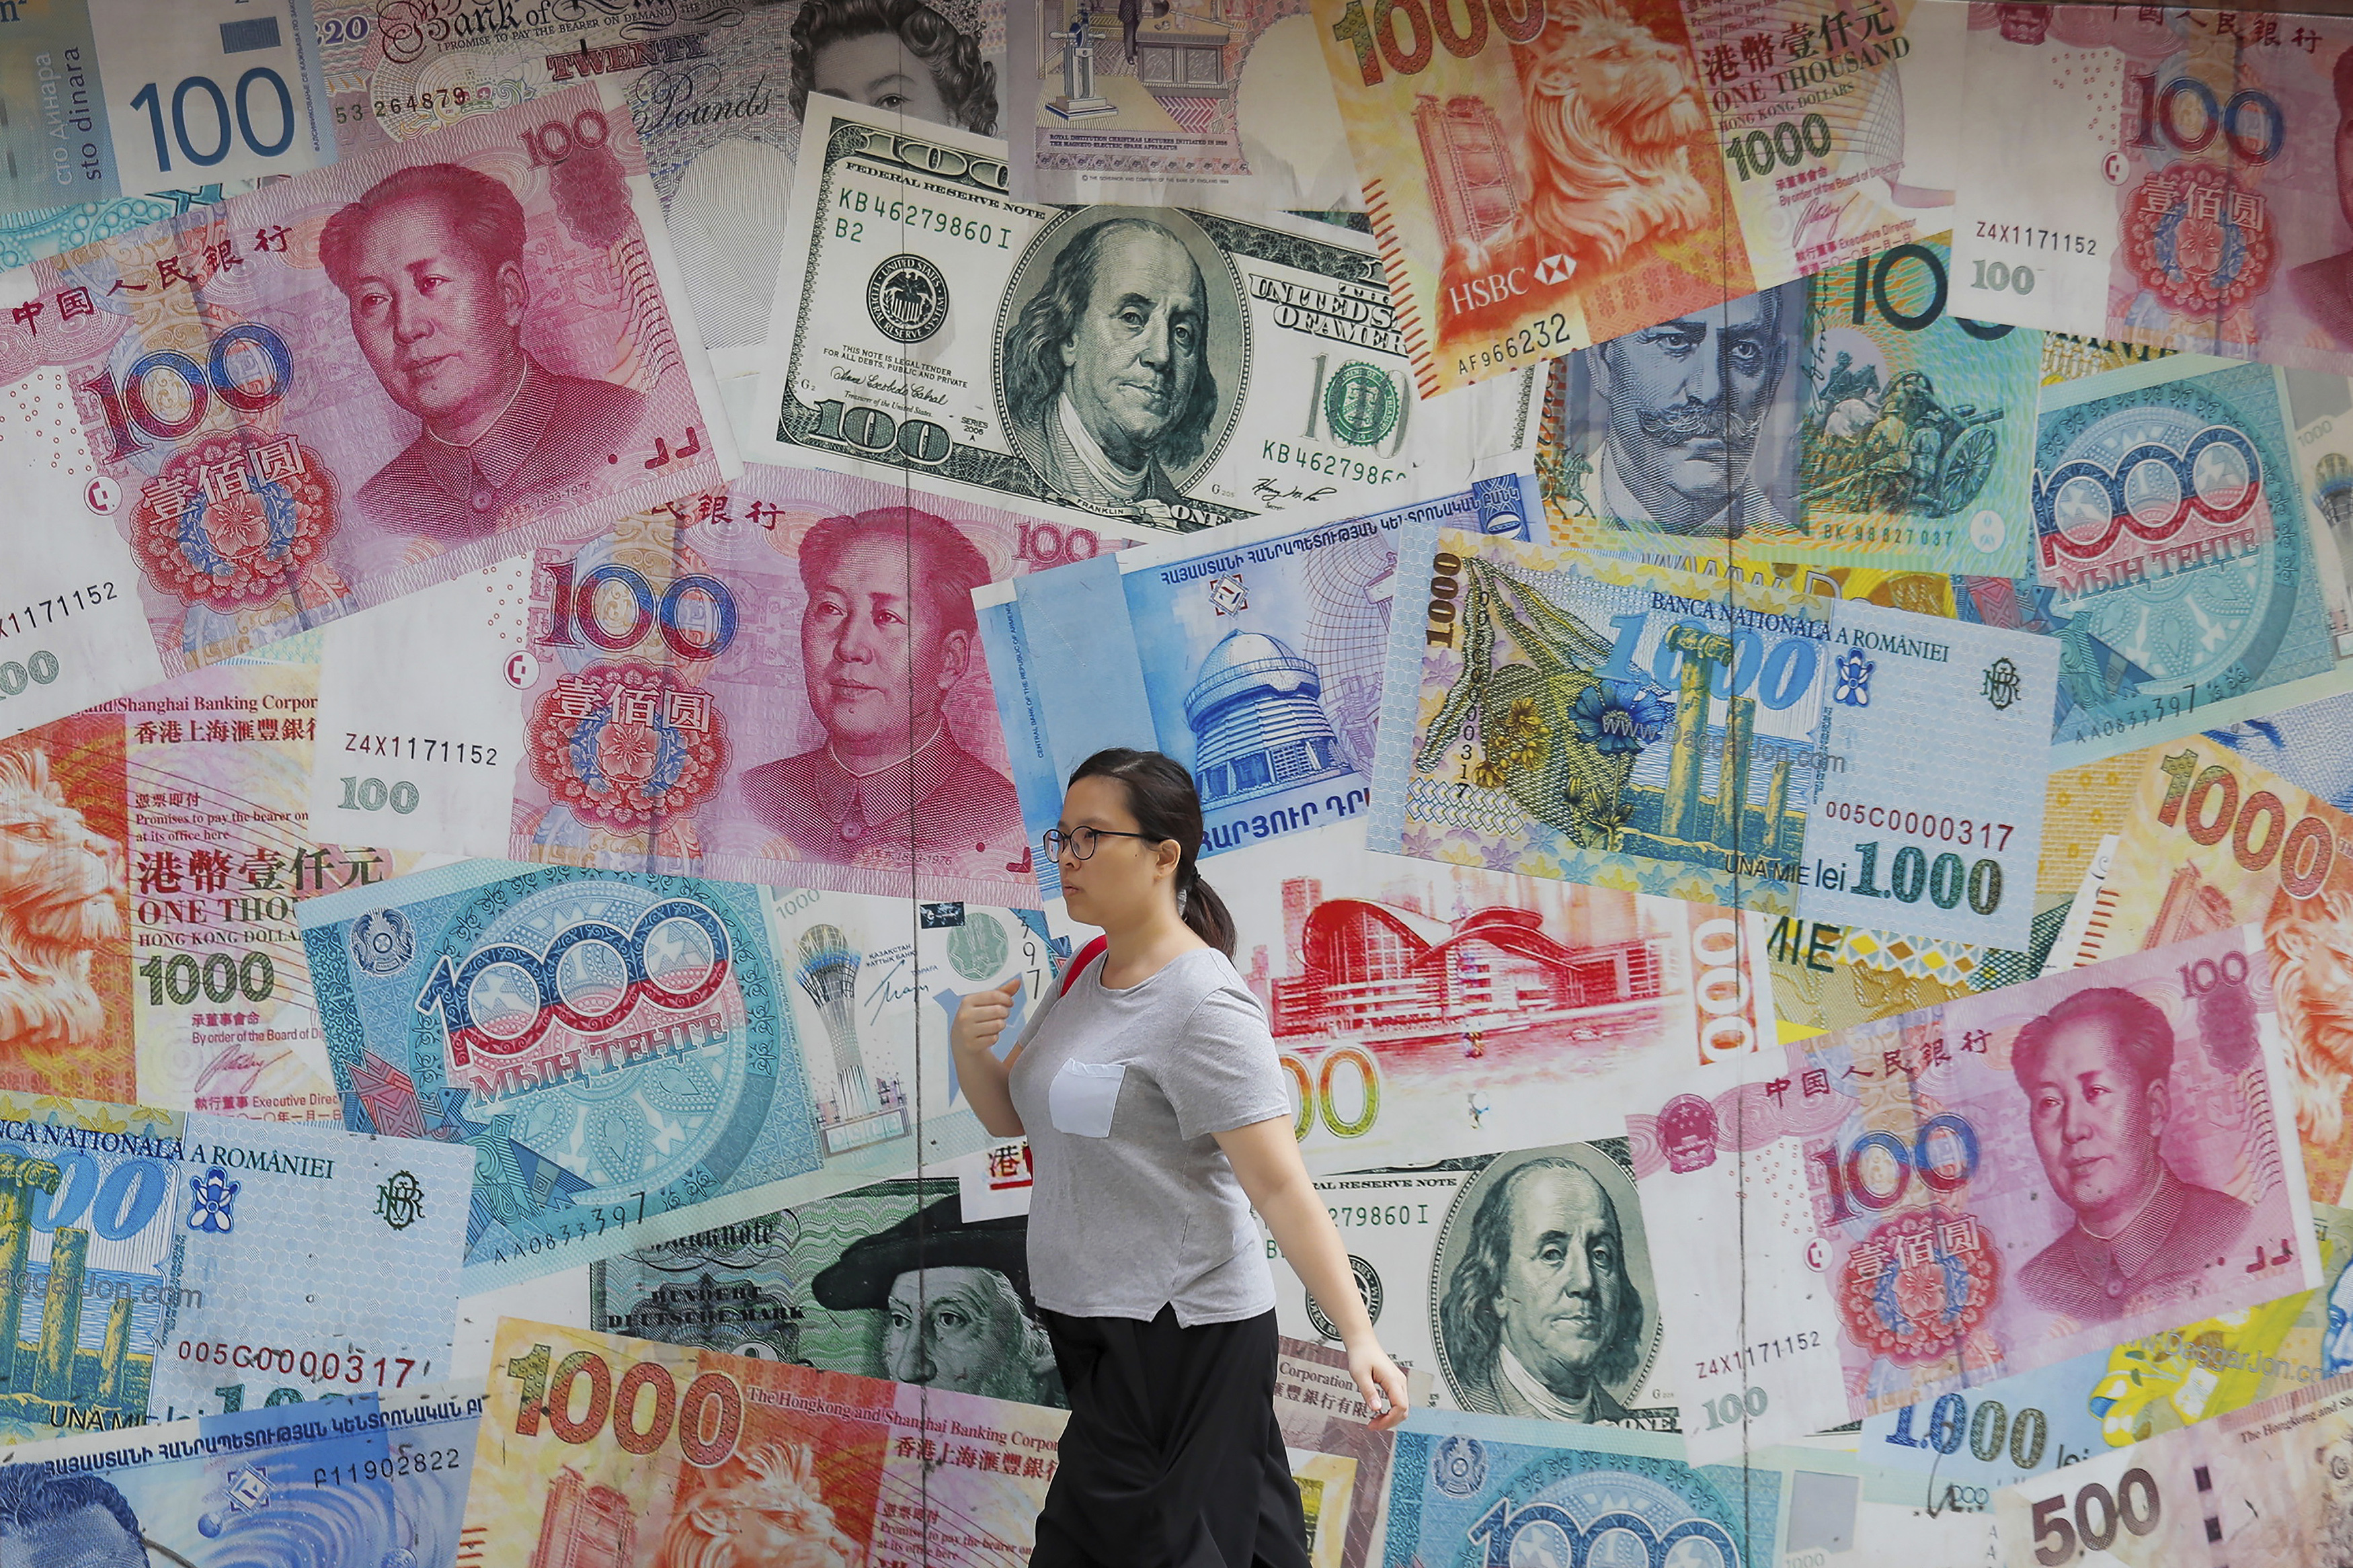 A woman walks by a money exchange shop in Hong Kong. Last night, the administration of President Donald Trump removed its designation of China as a currency manipulator. Photo: AP Photo